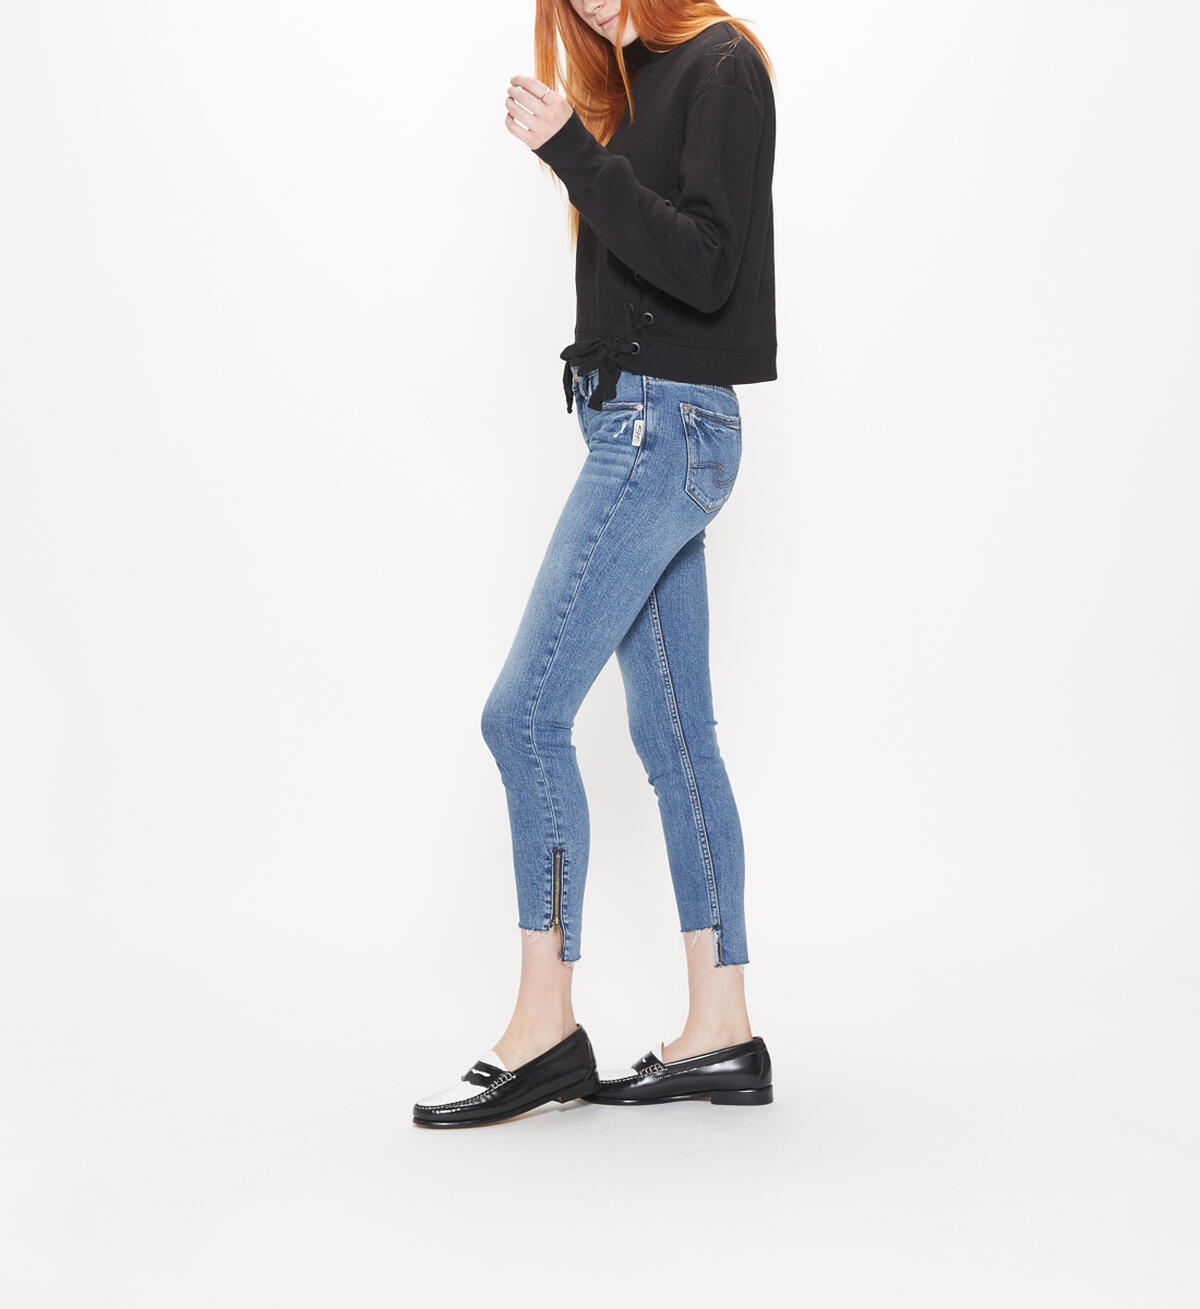 Aiko Mid Rise Ankle Slim Jeans Final Sale, , hi-res image number 2